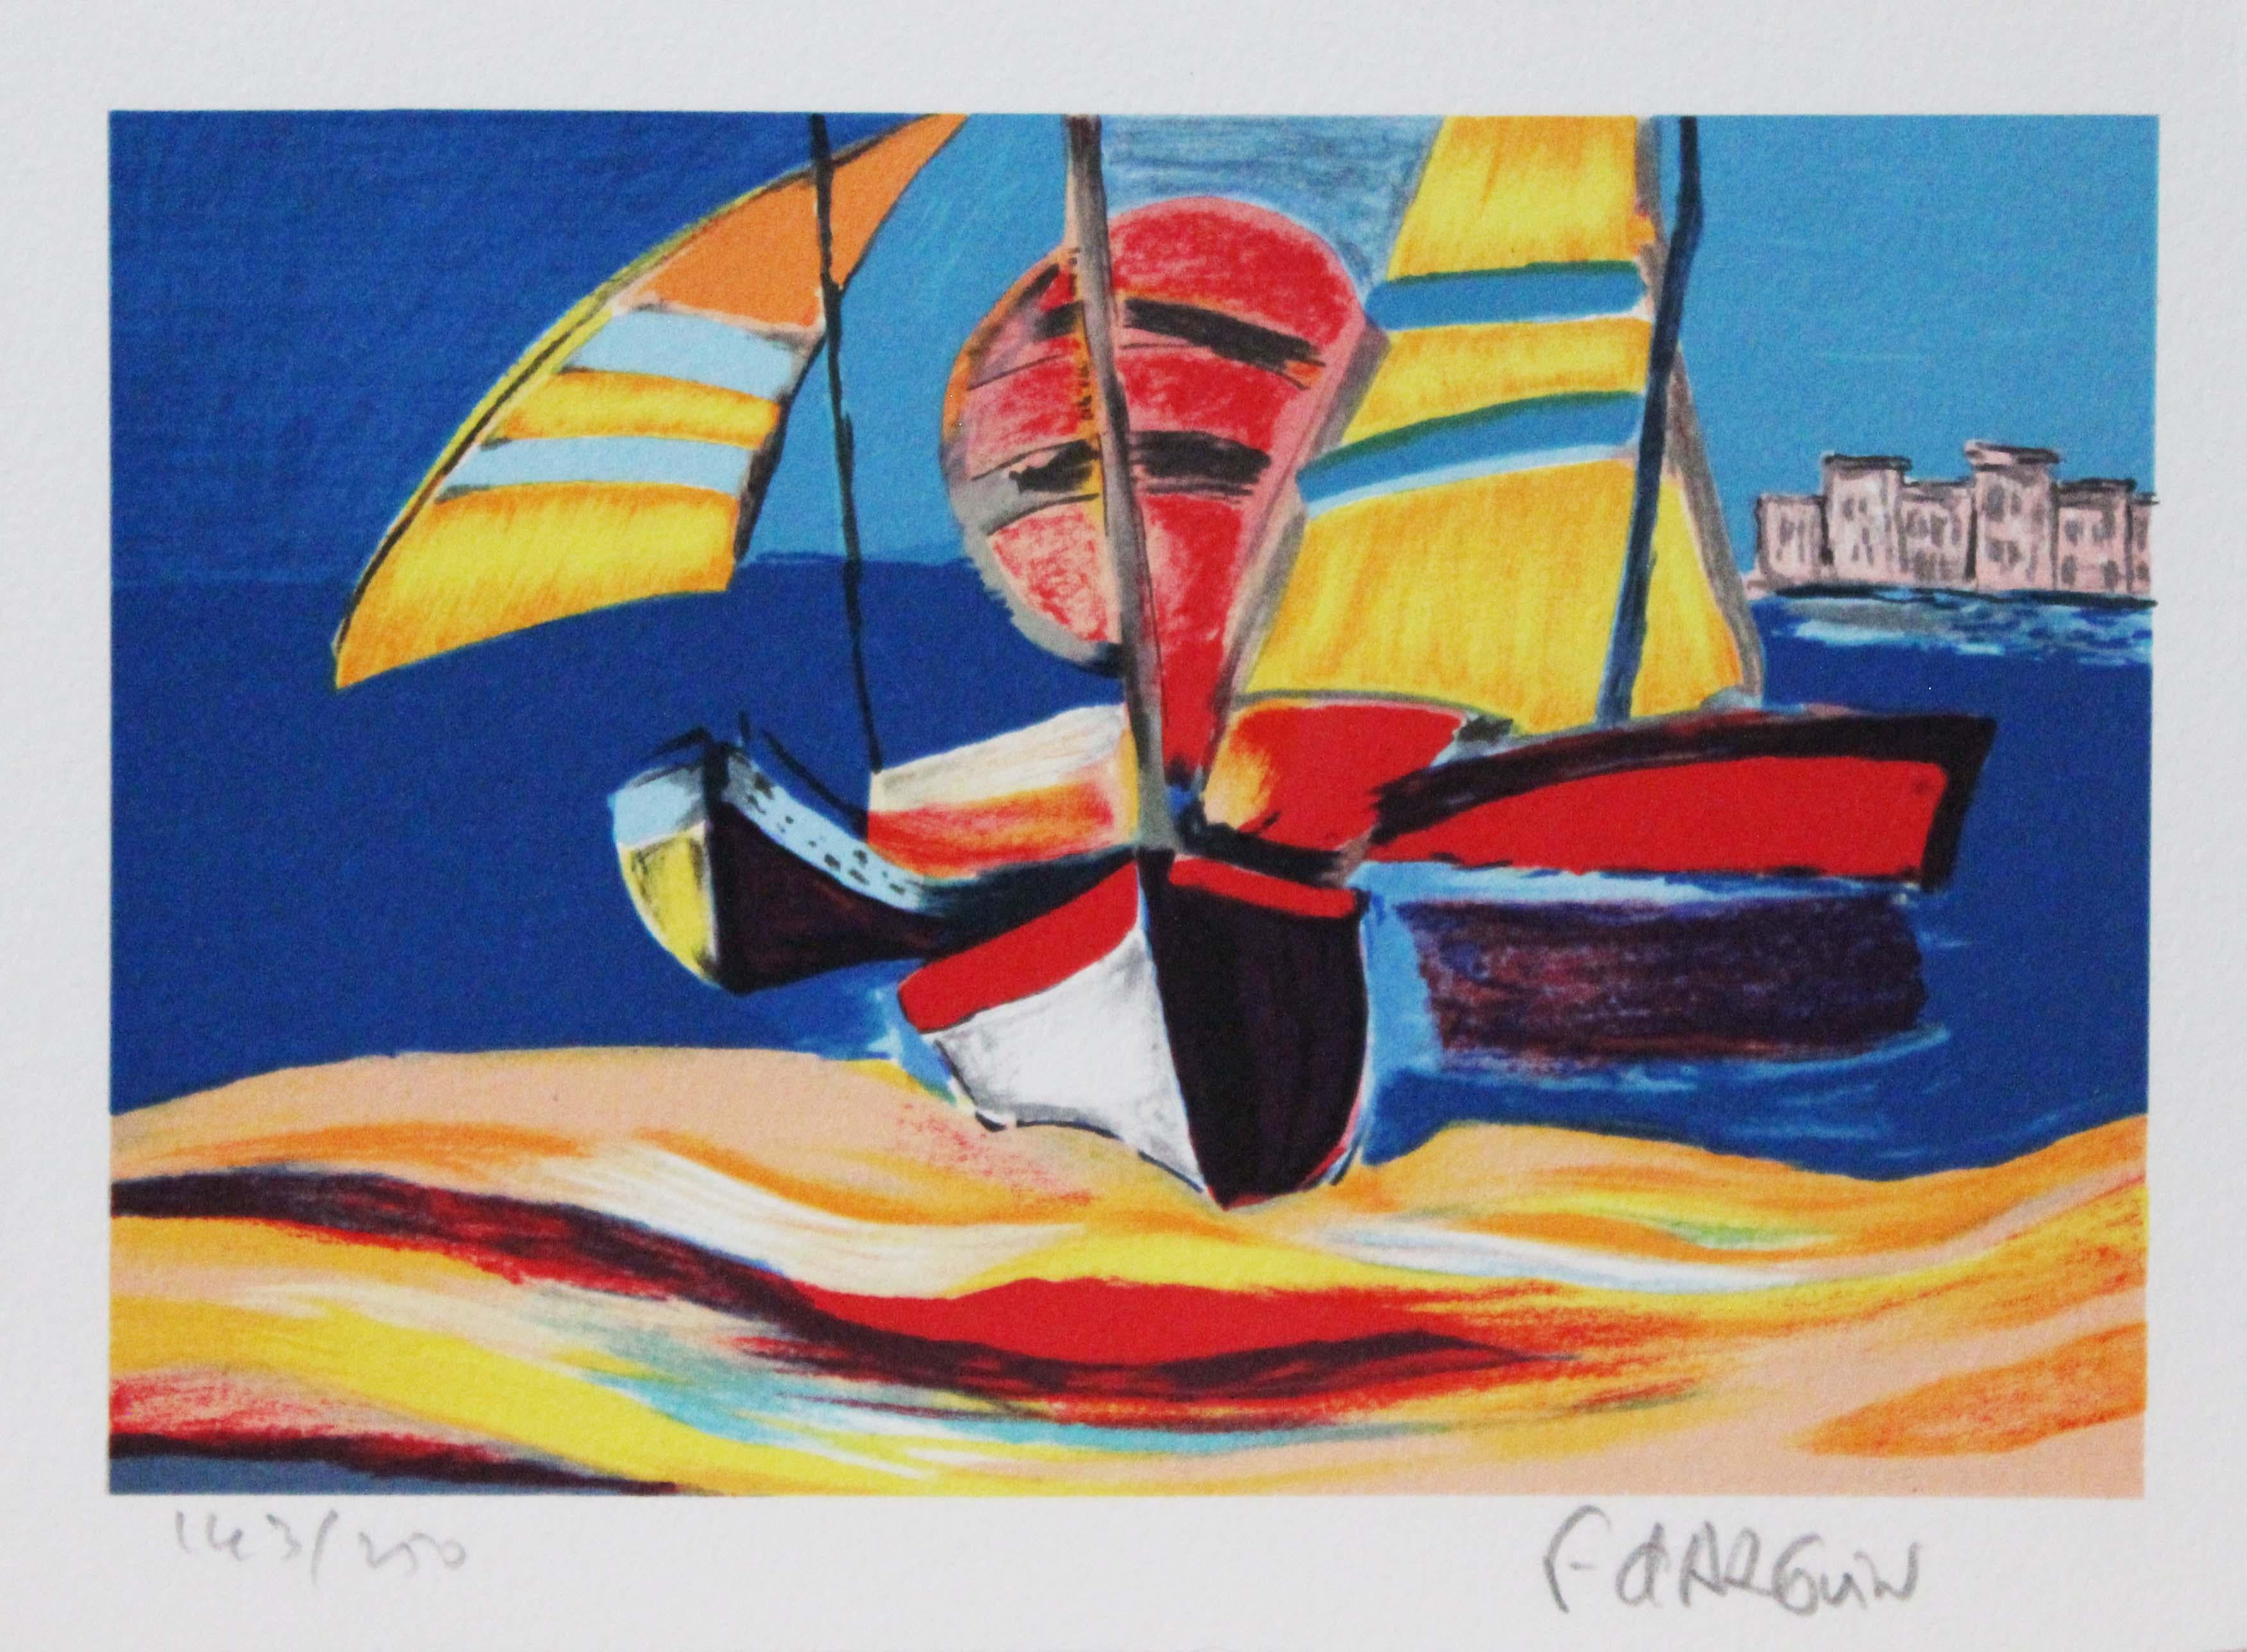 Francois D’Arguin Landscape Print - "Title Unknown" Nautical-themed Limited Edition Print. Pencil-signed by Artist